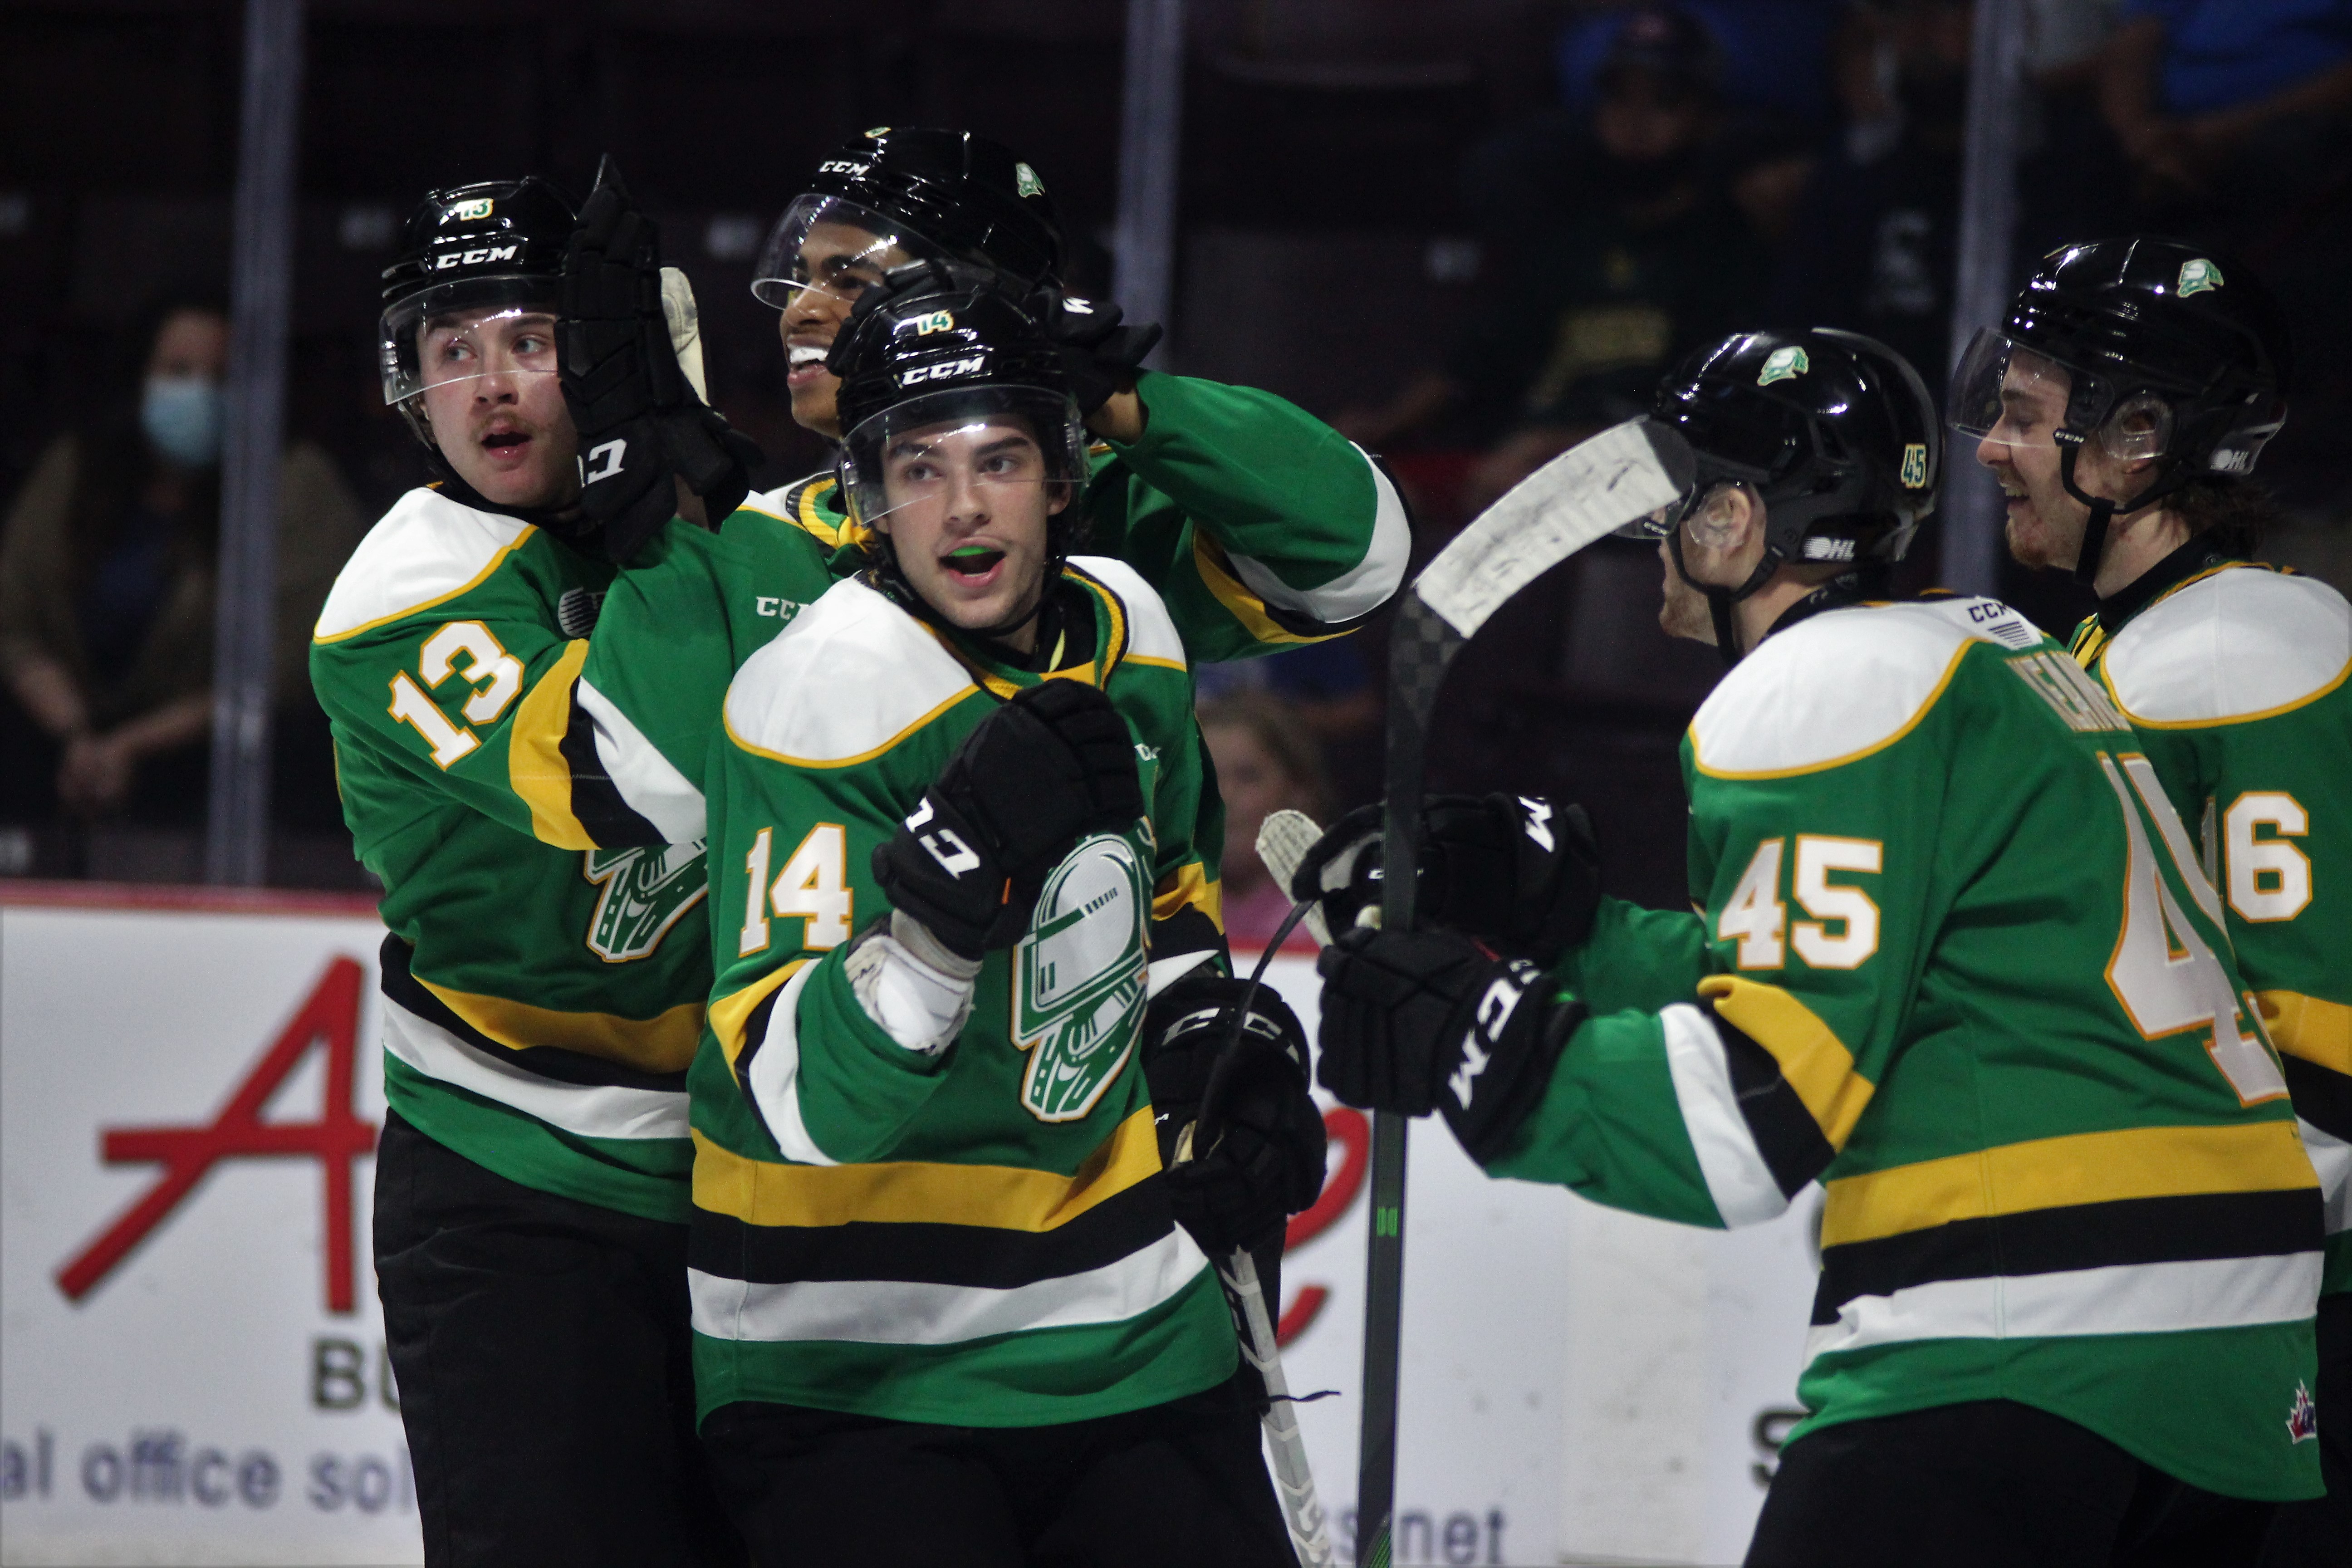 London Knights to play through rescheduled weekend amid OHL changes